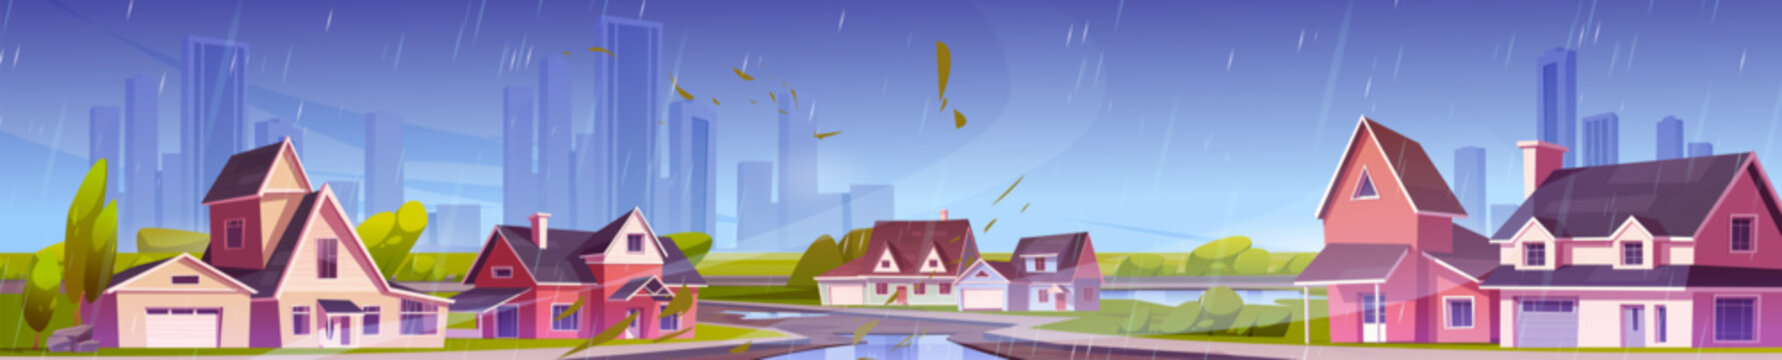 Suburban landscape with countryside house in rain. Cartoon vector illustration of cityscape street with private family home in wet rainy weather. Suburb with neighborhood cottages, yards and trees.